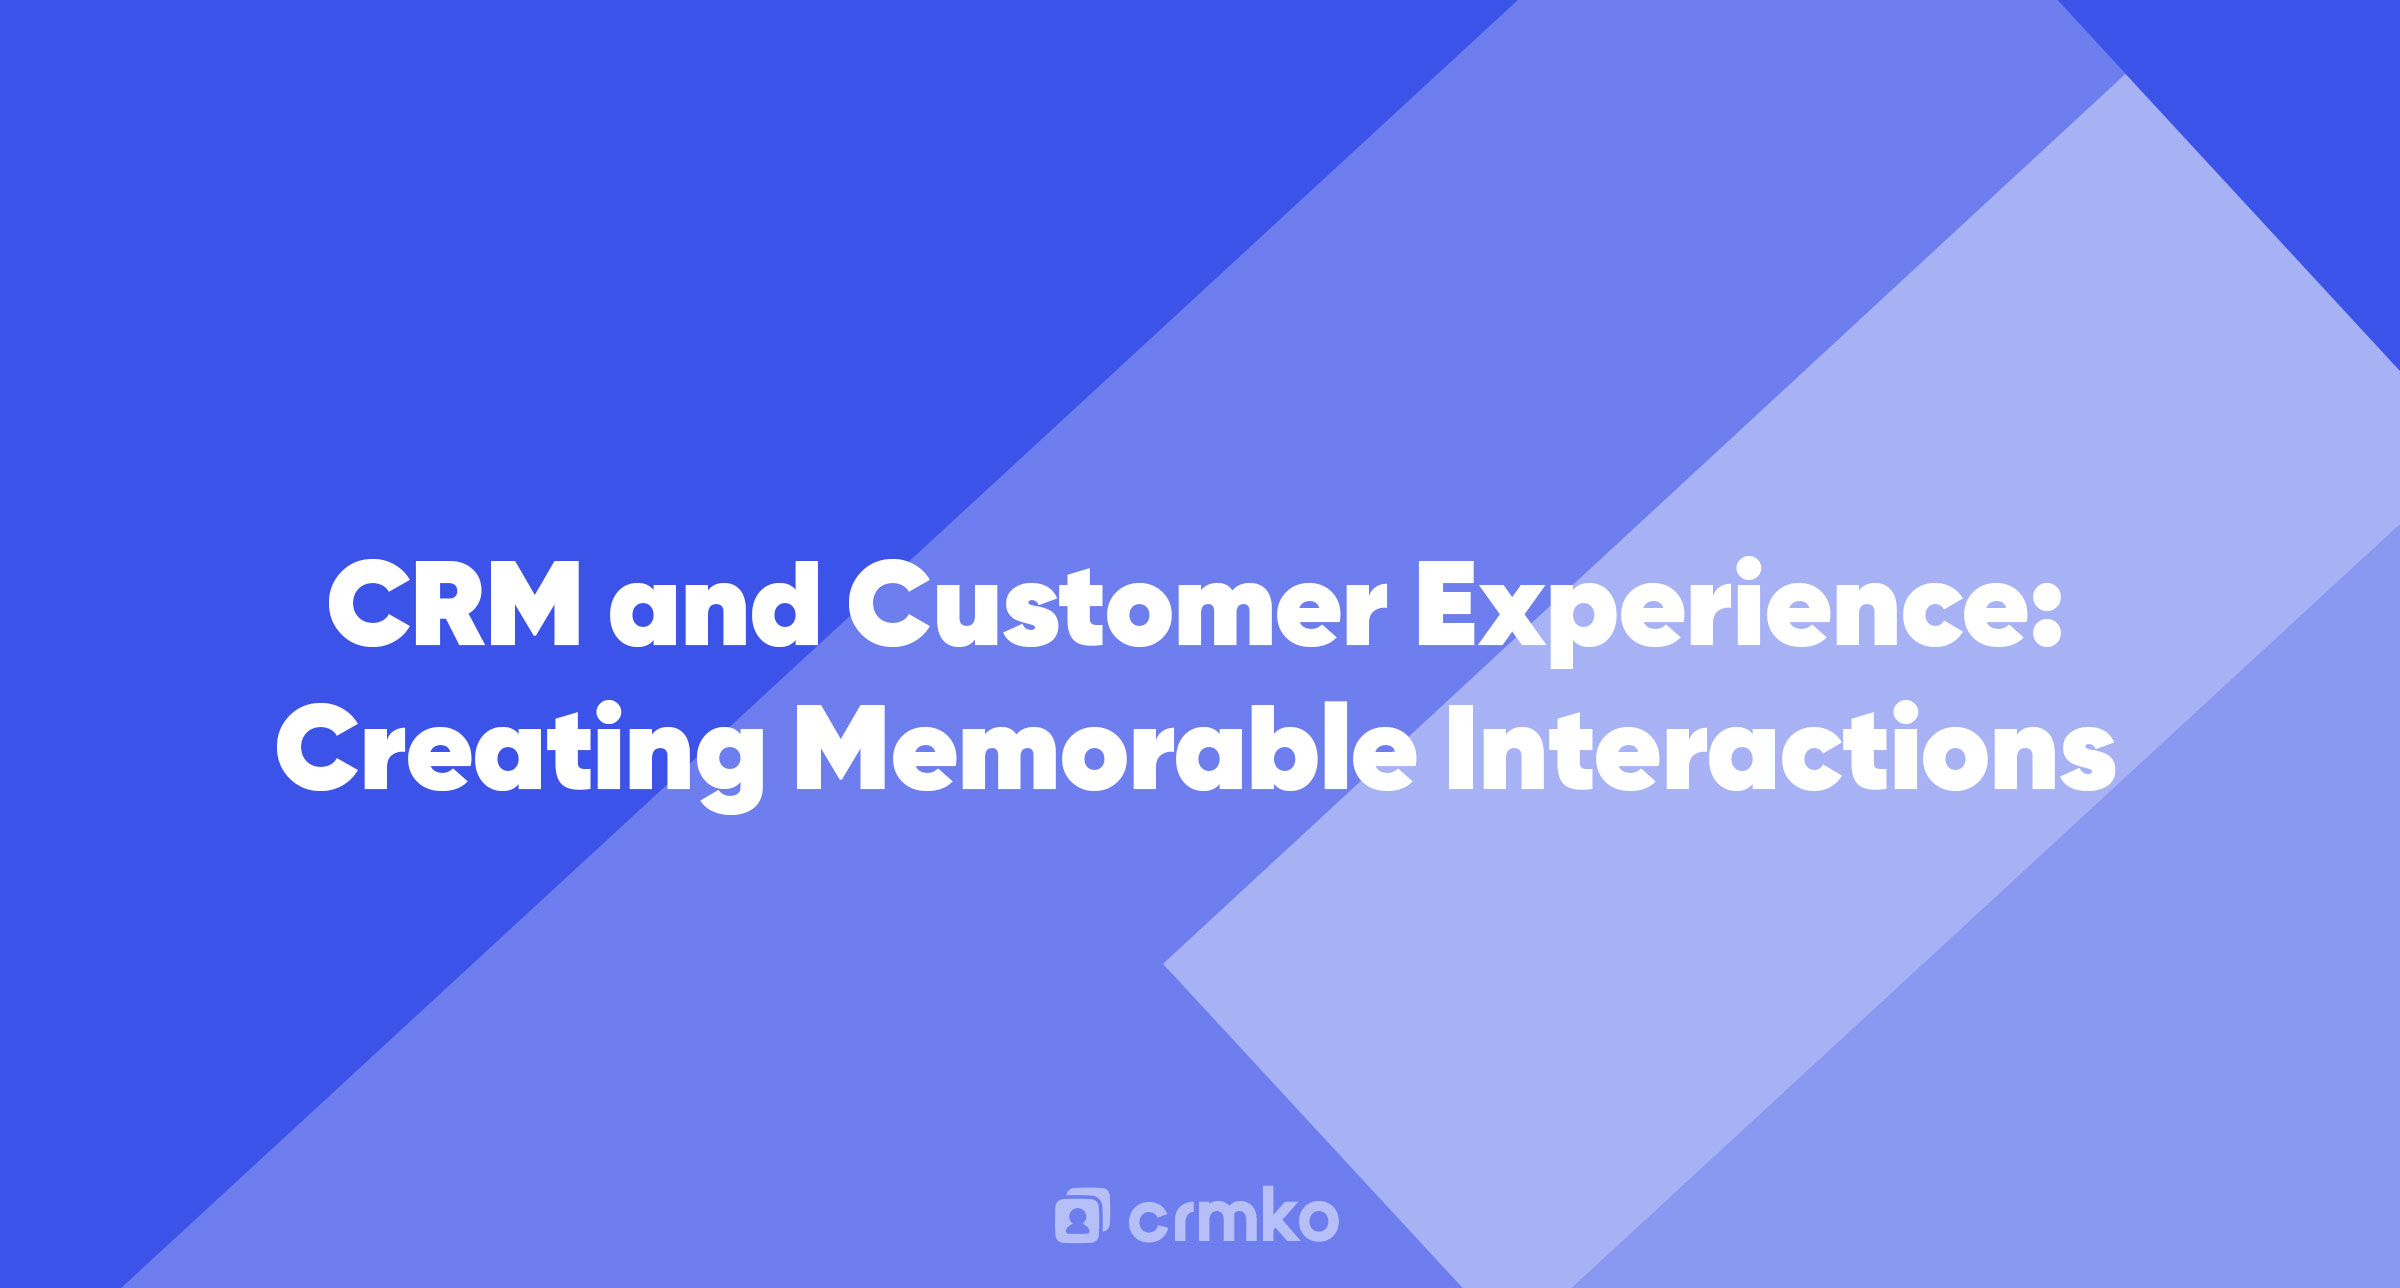 Article | CRM and Customer Experience: Creating Memorable Interactions